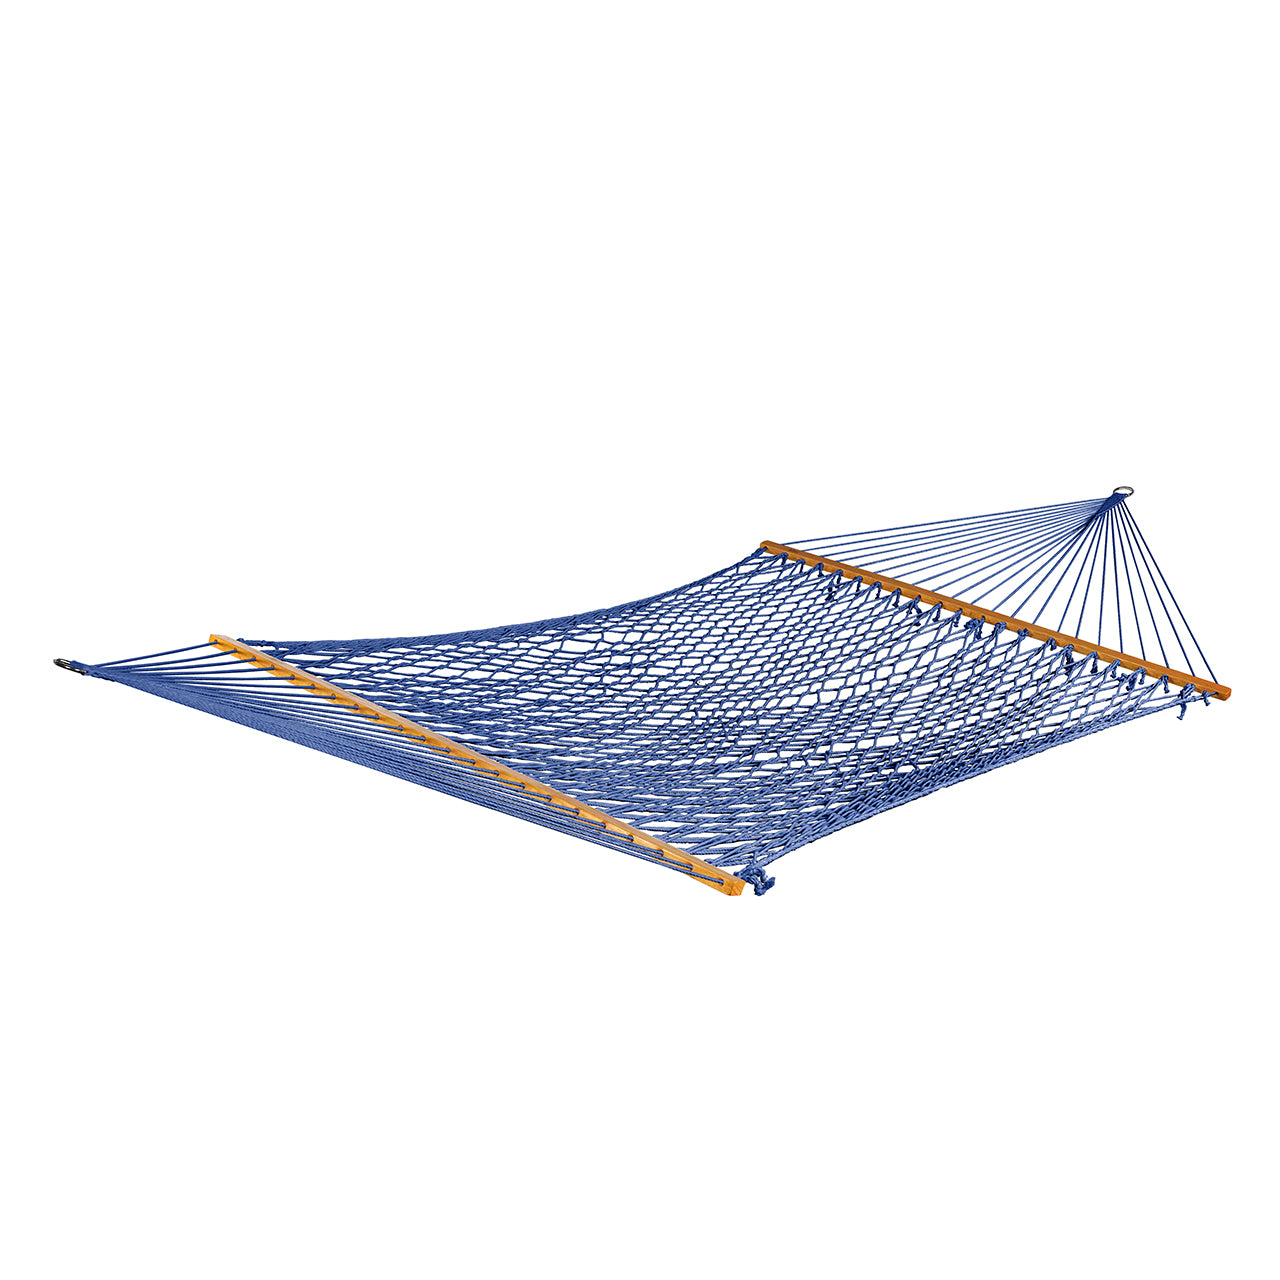 Bliss Hammocks 60-inch Wide Cotton Rope Hammock with Spreader Bar, S Hooks, and Chains in the blue variation.